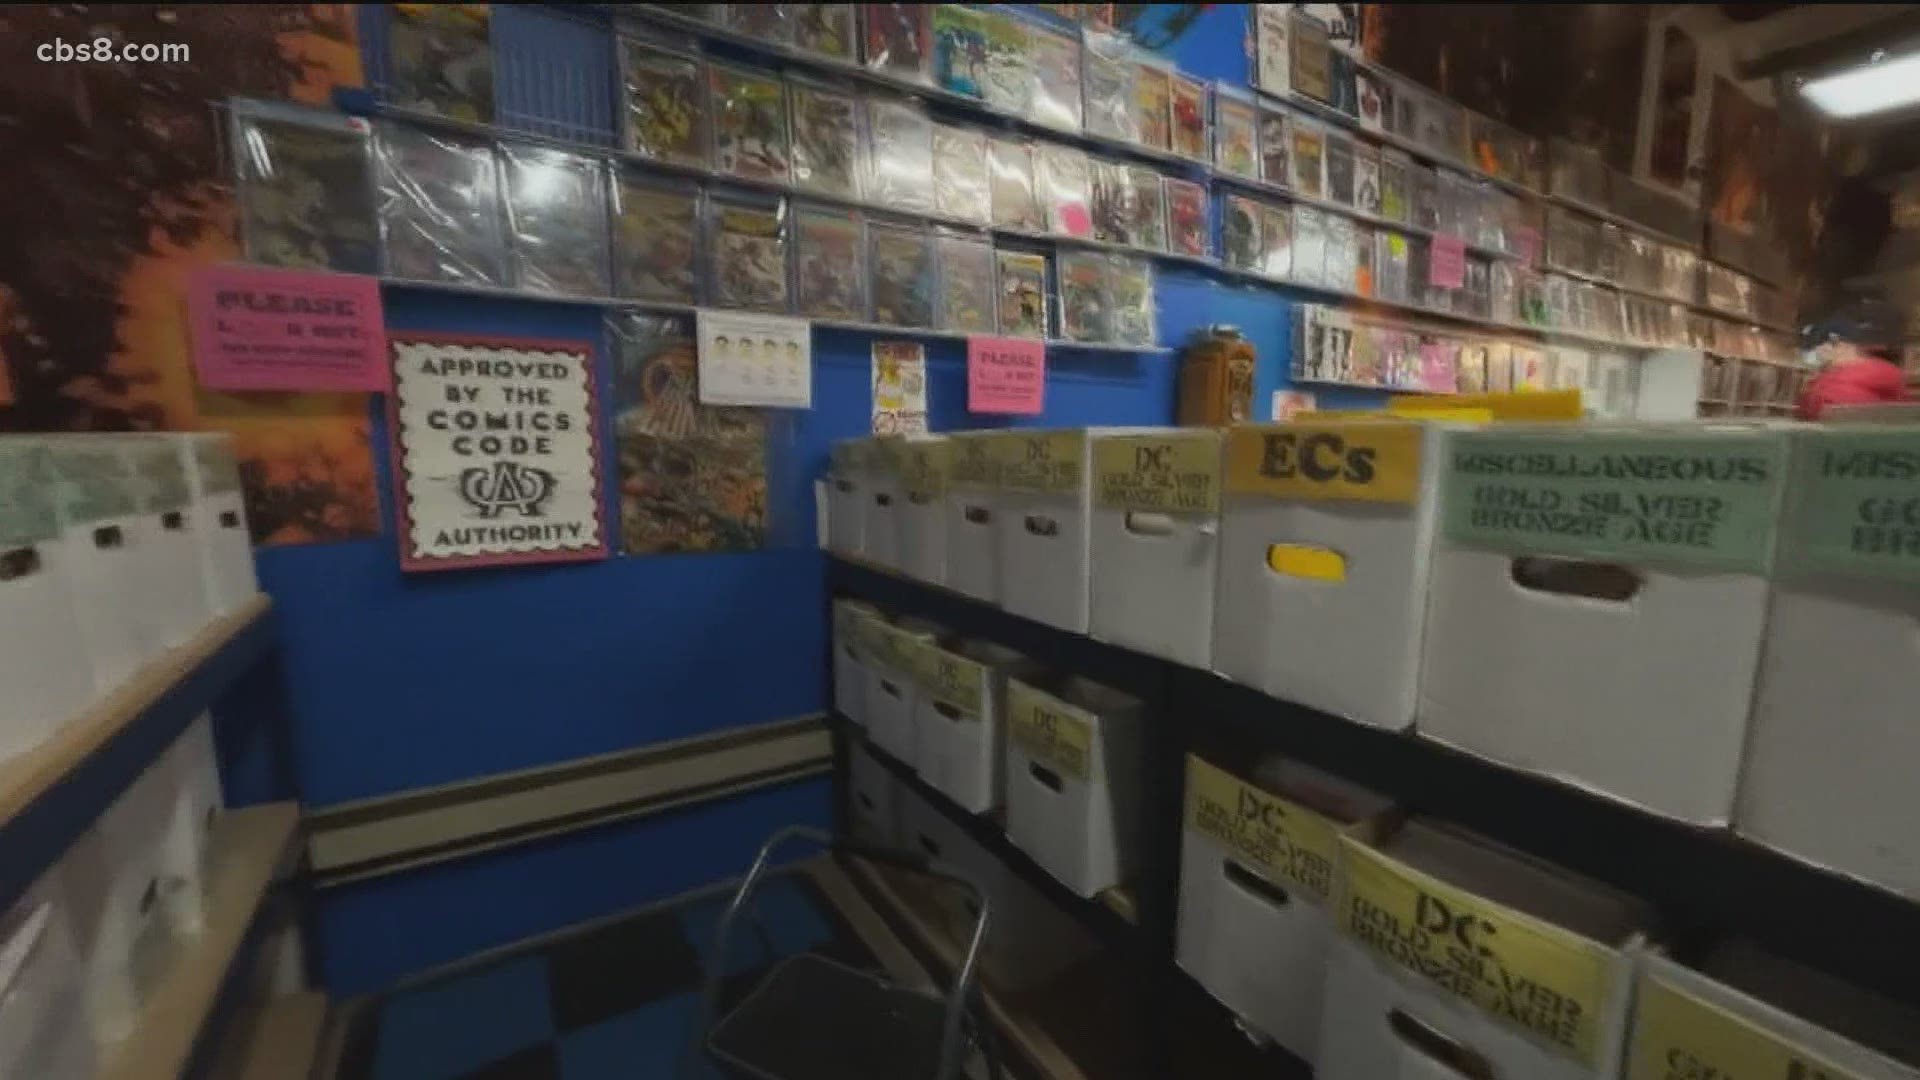 The shop in Kearny Mesa has been selling collectible comic books, graphic novels, and other art for 22 years now.